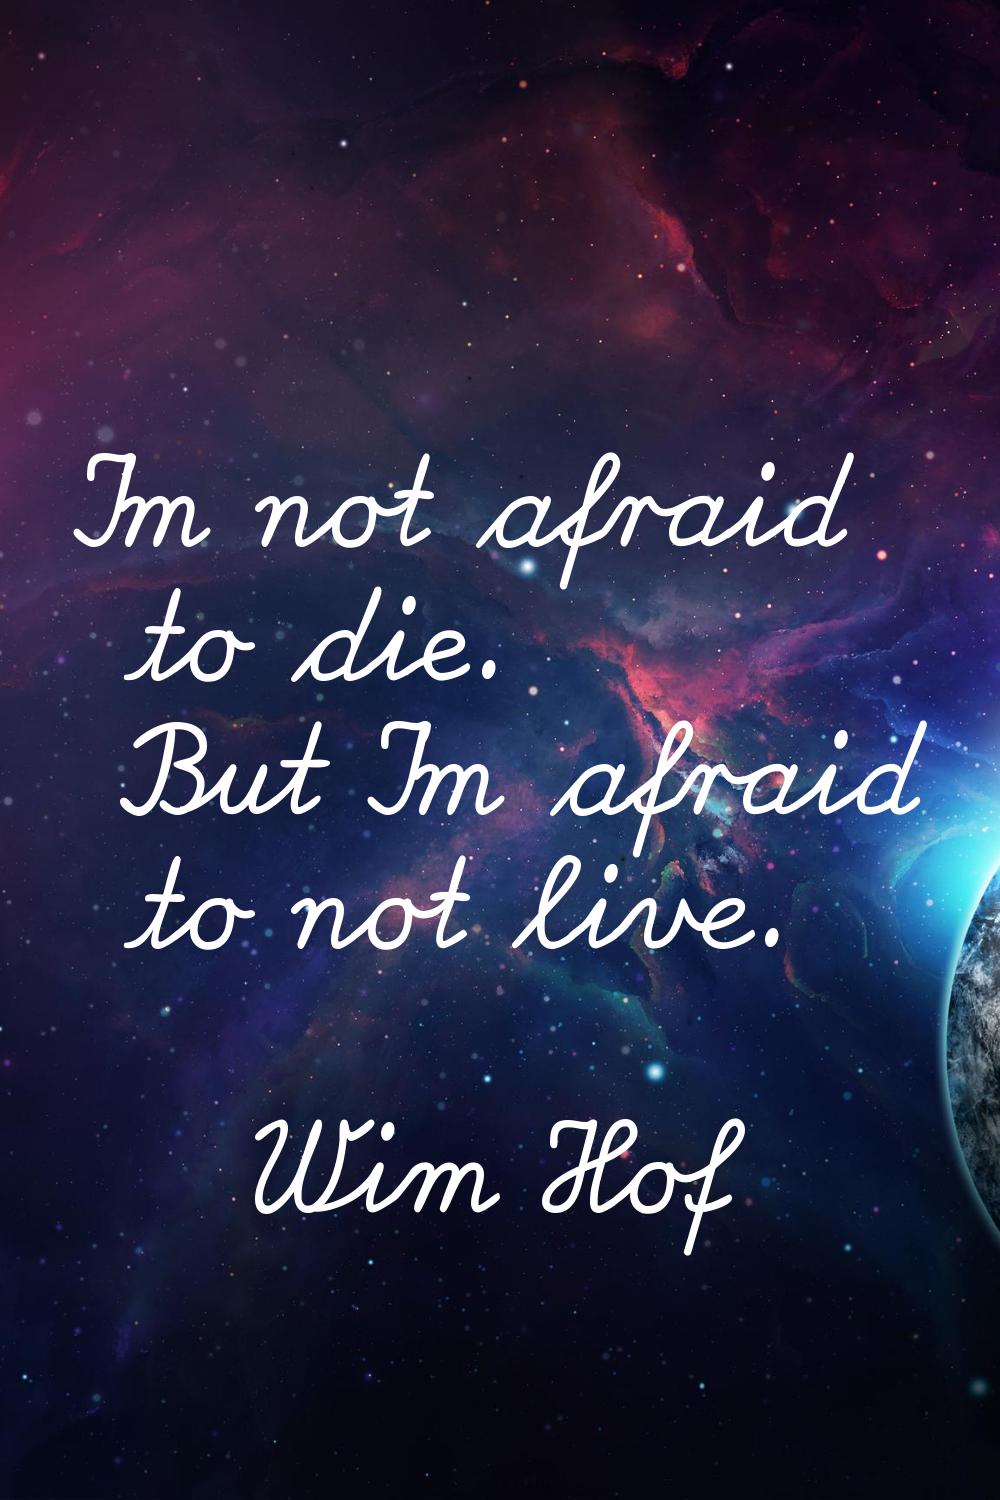 I'm not afraid to die. But I'm afraid to not live.